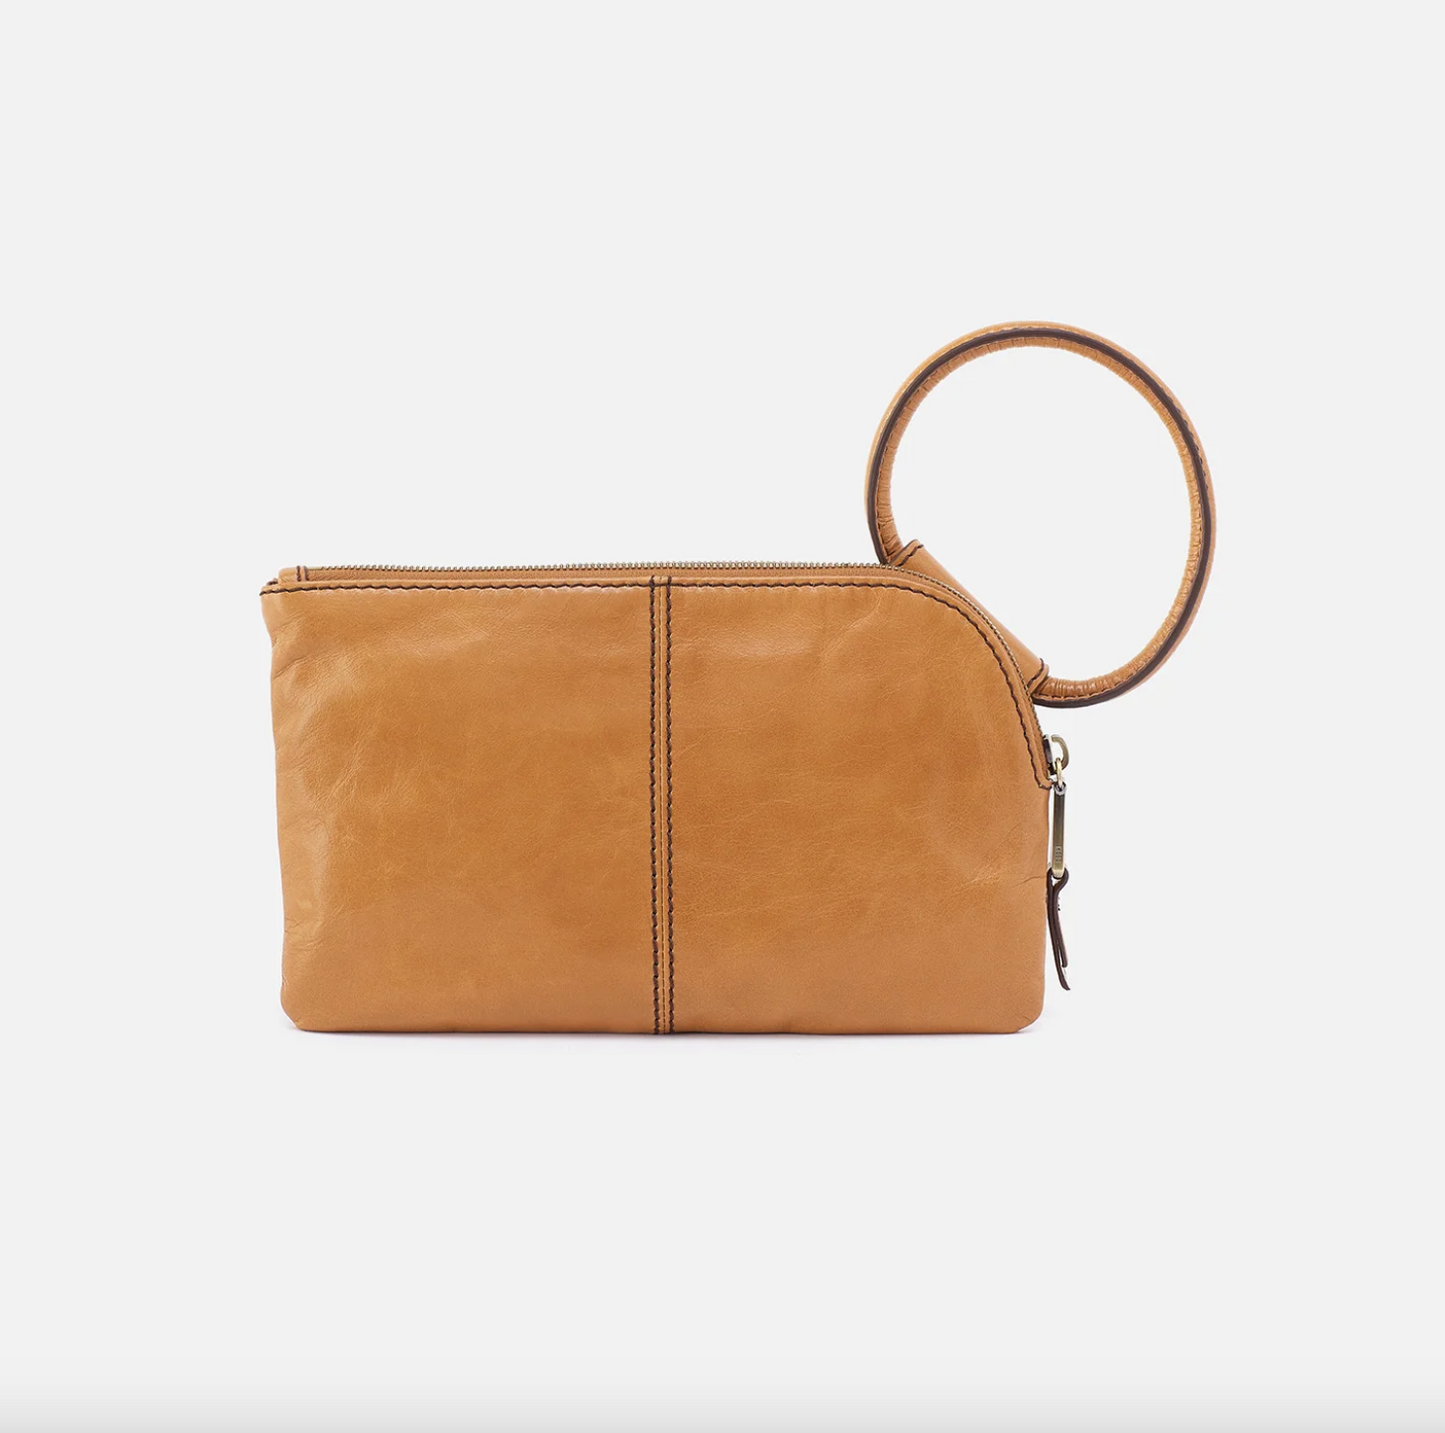 SABLE WRISTLET in Natural